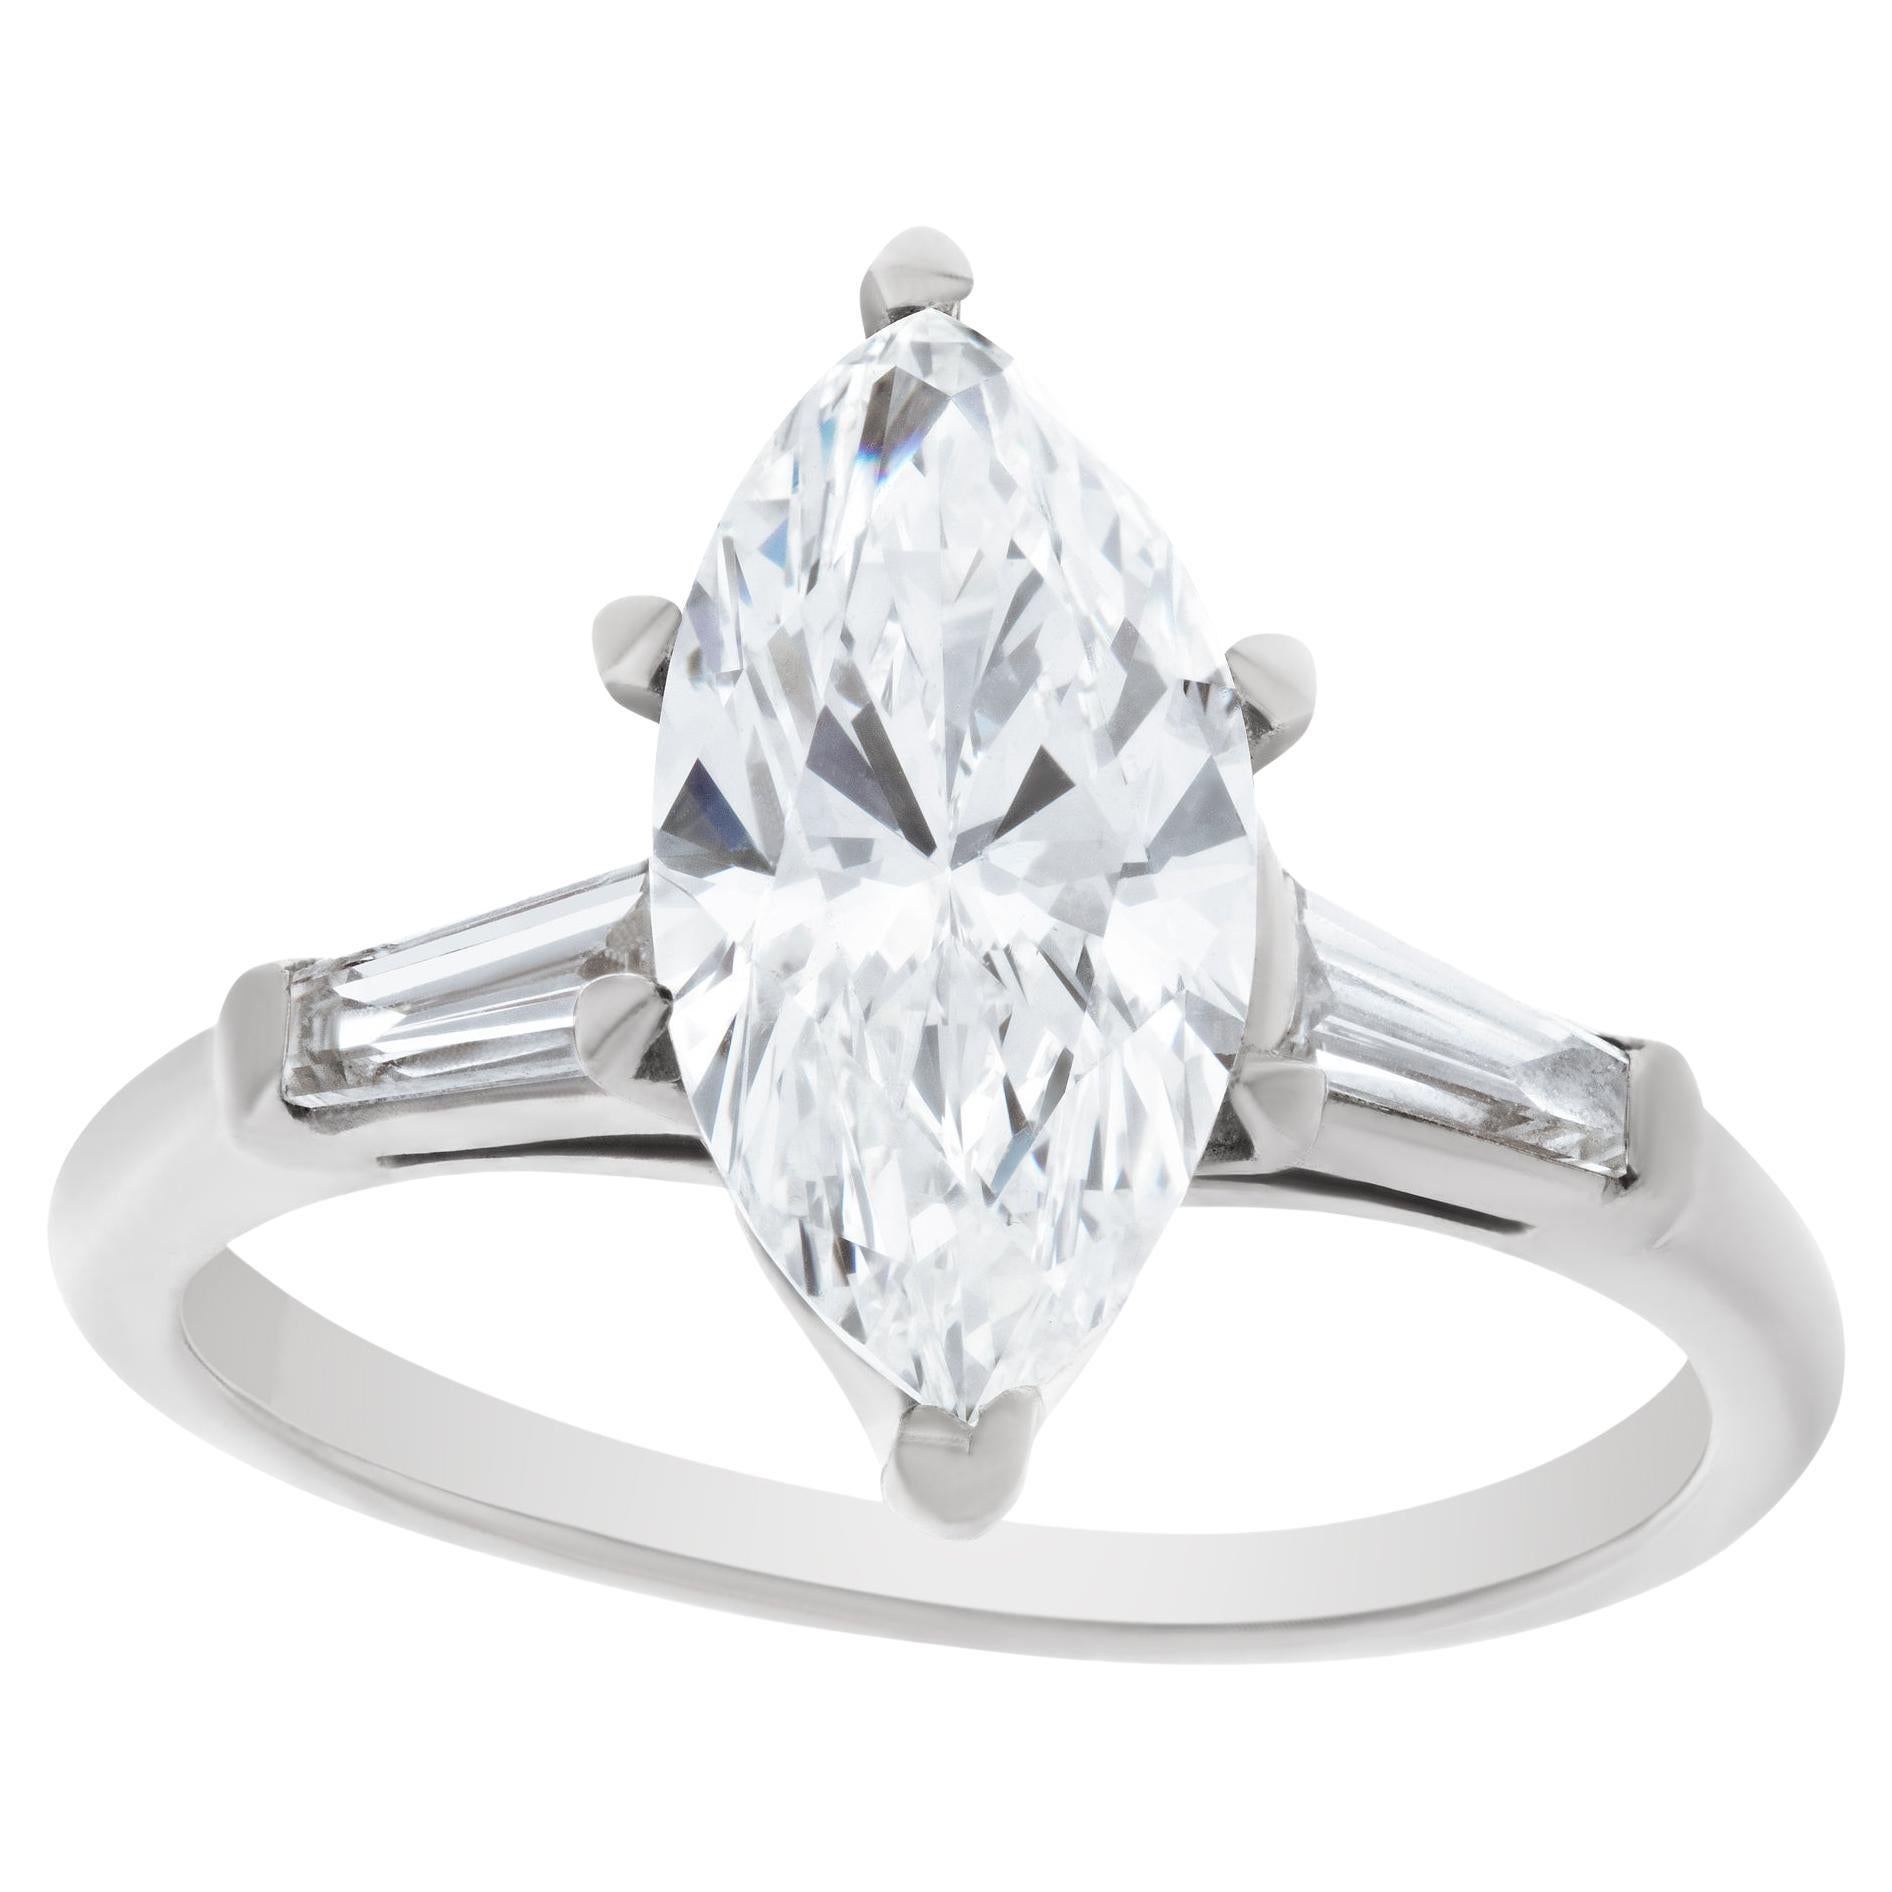 GIA certified marquise brilliant cut diamond Ring 1.75 carat  For Sale